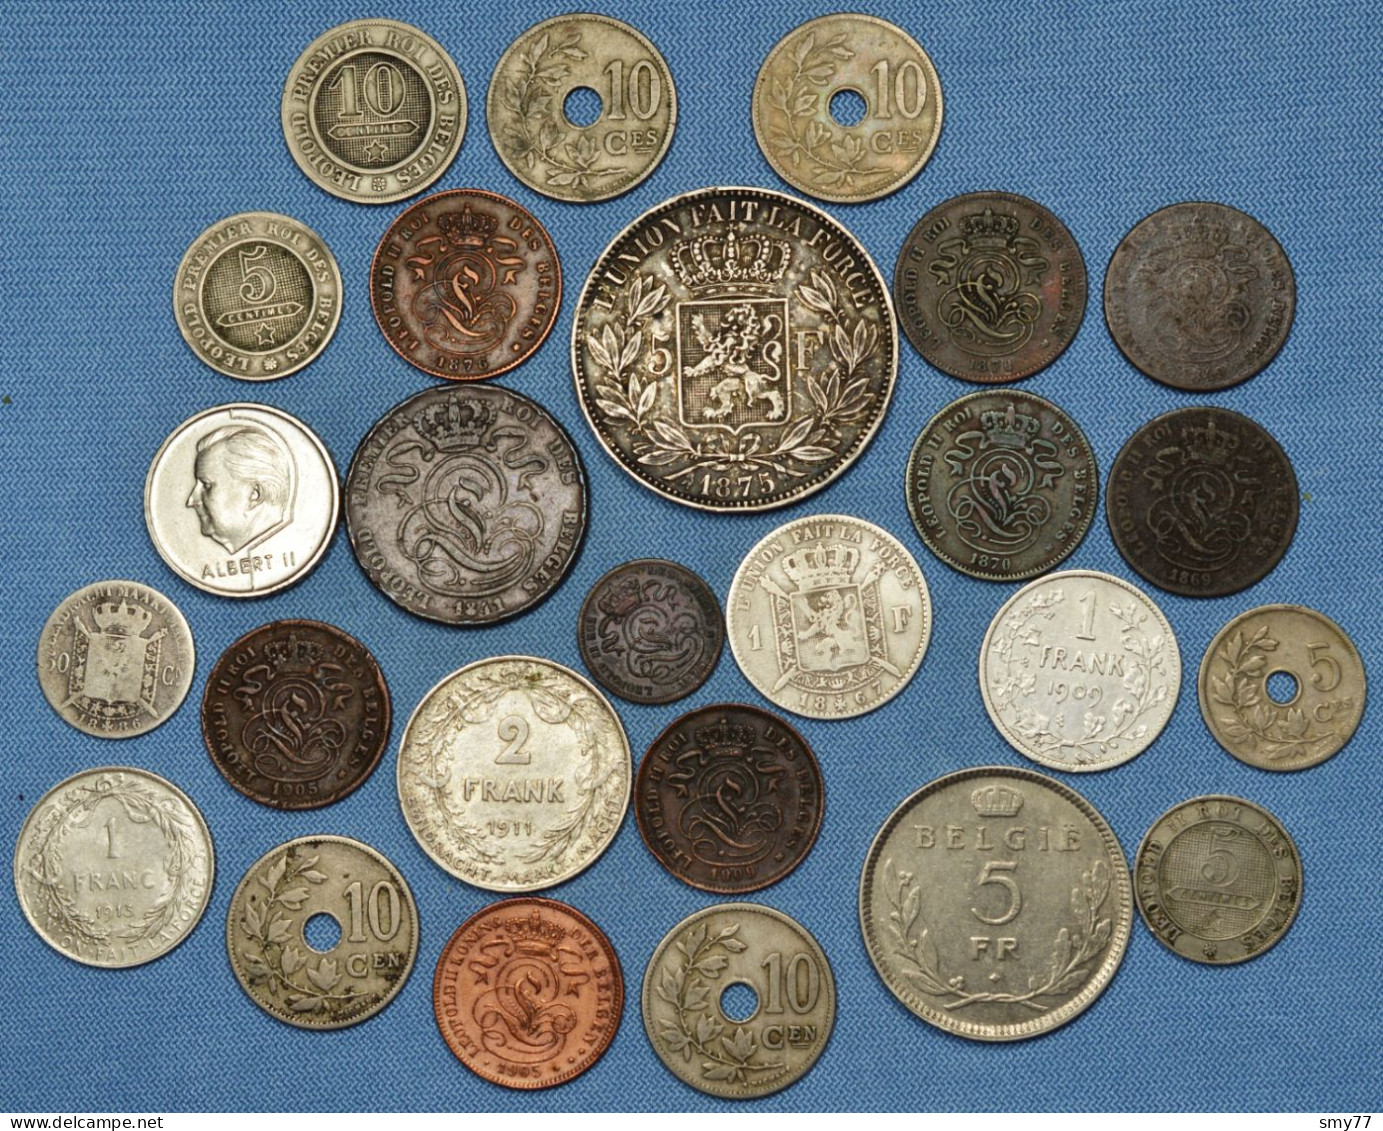 Belgique / Belgium (3) • Lot 26x • Only Scarcer And Many Silver Coins •  [24-442] - Colecciones